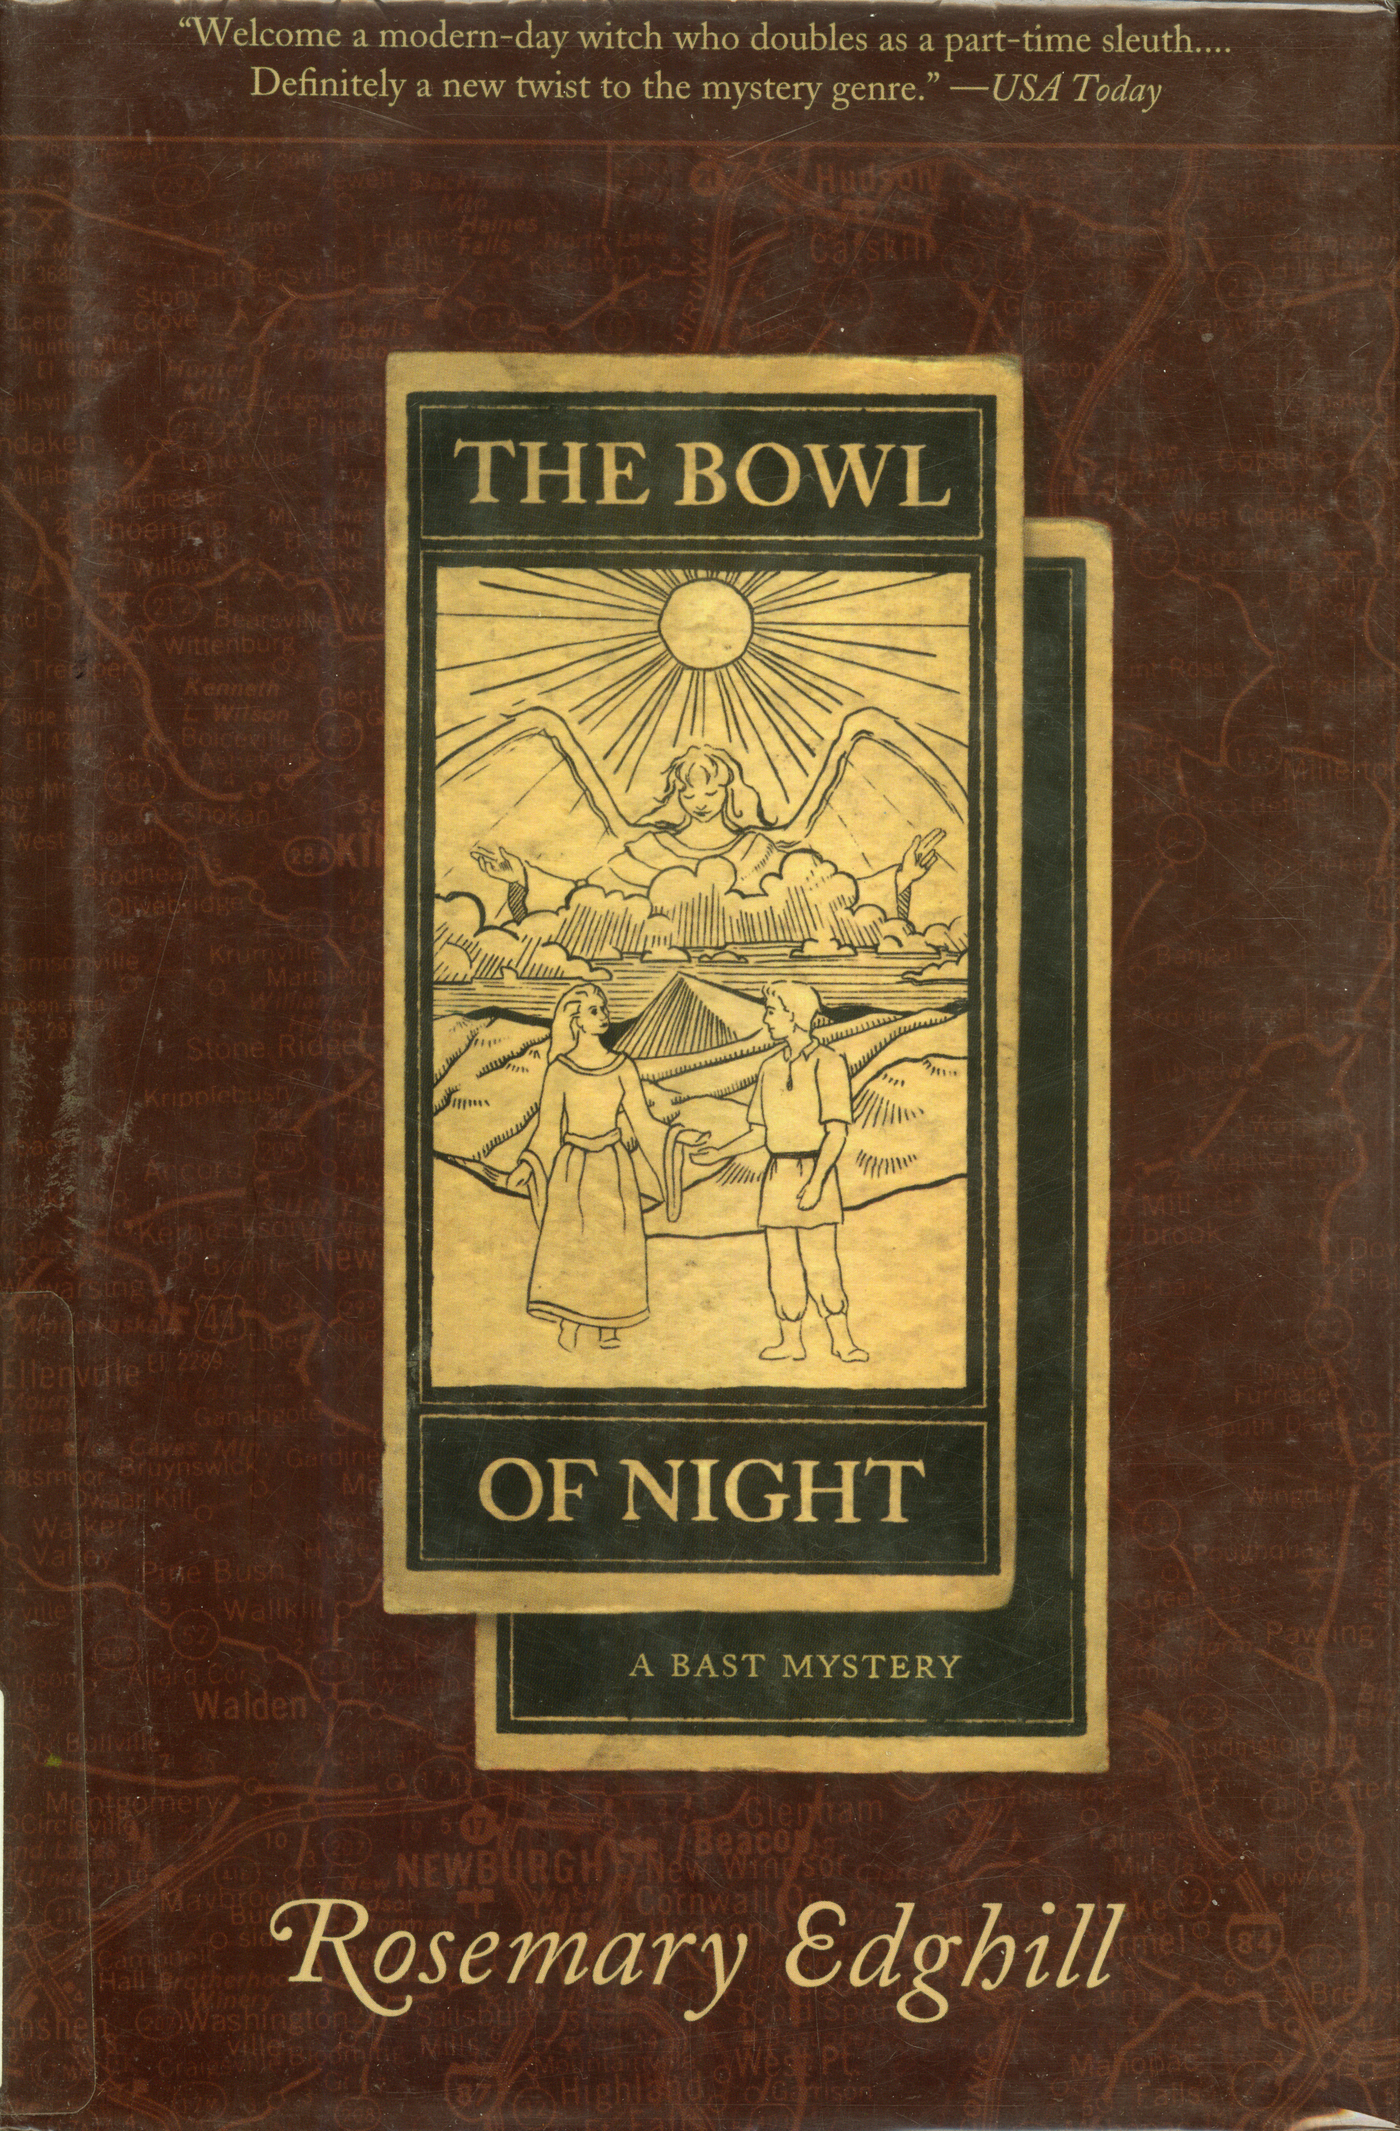 The Bowl of Night : A Bast Mystery by Rosemary Edghill